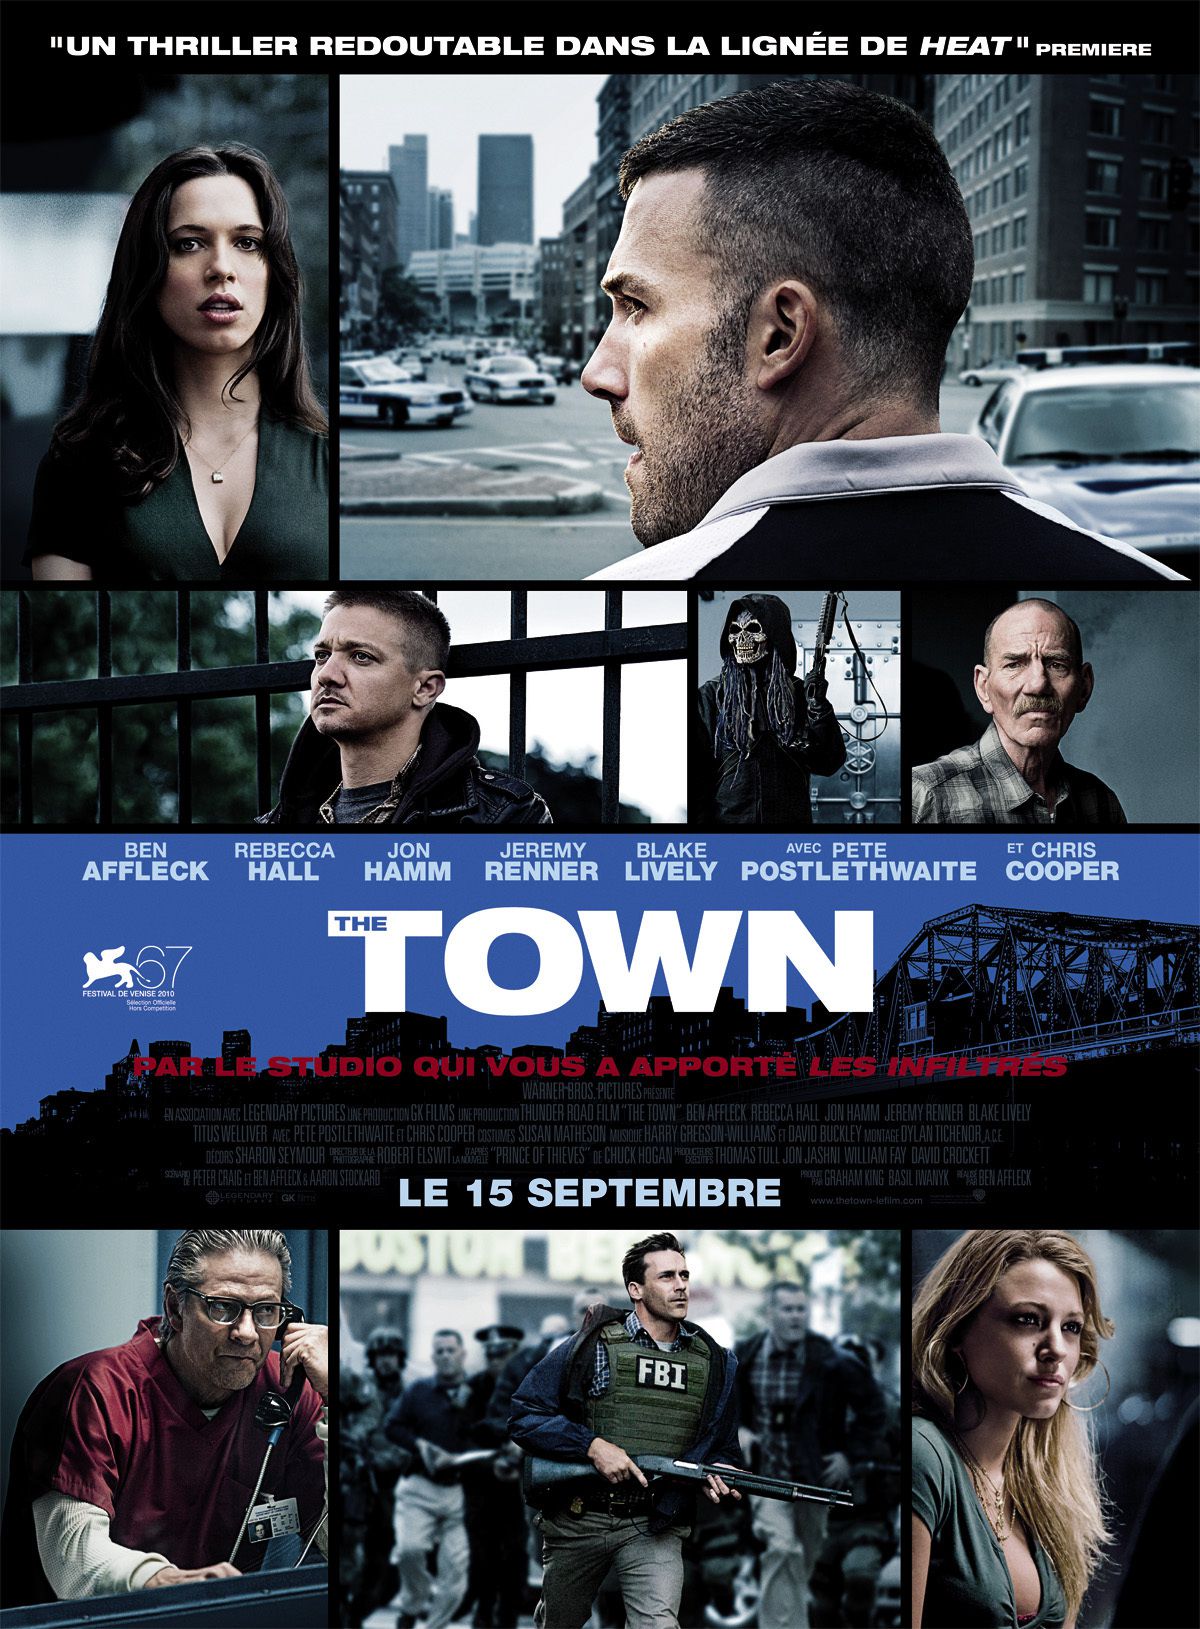 The Town - Film (2010)